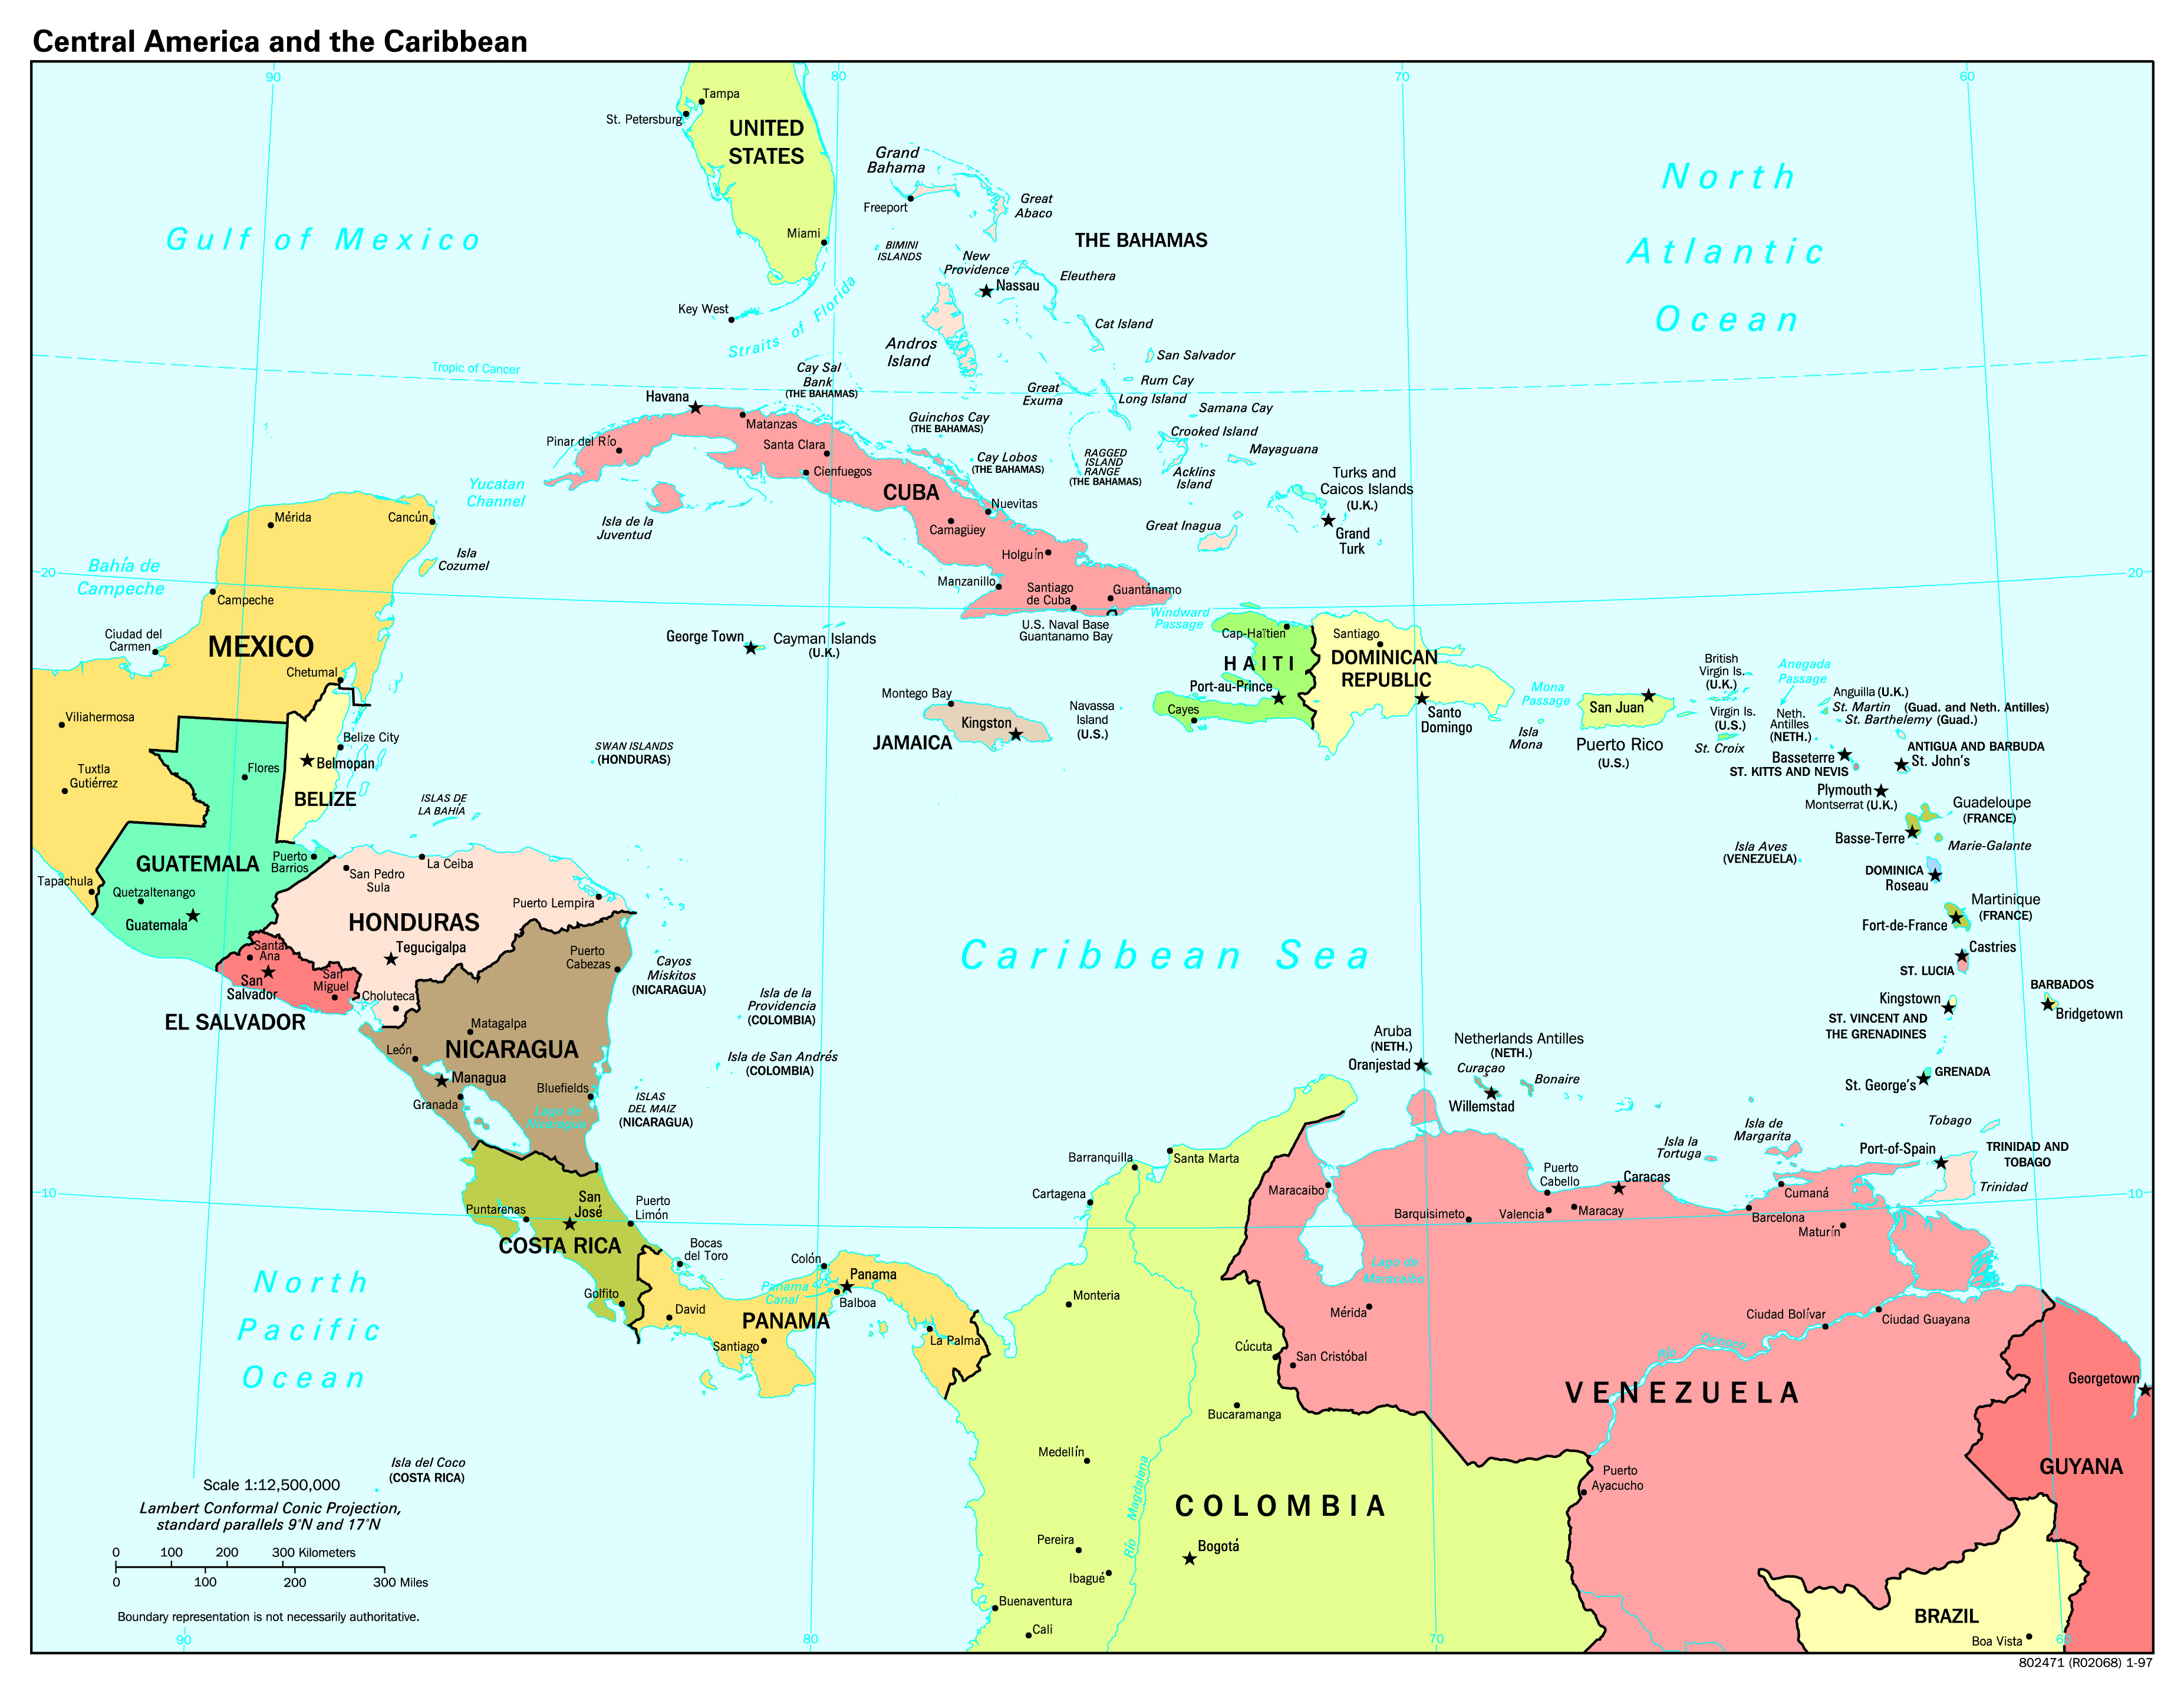 large-scale-political-map-of-central-america-and-the-caribbean-with